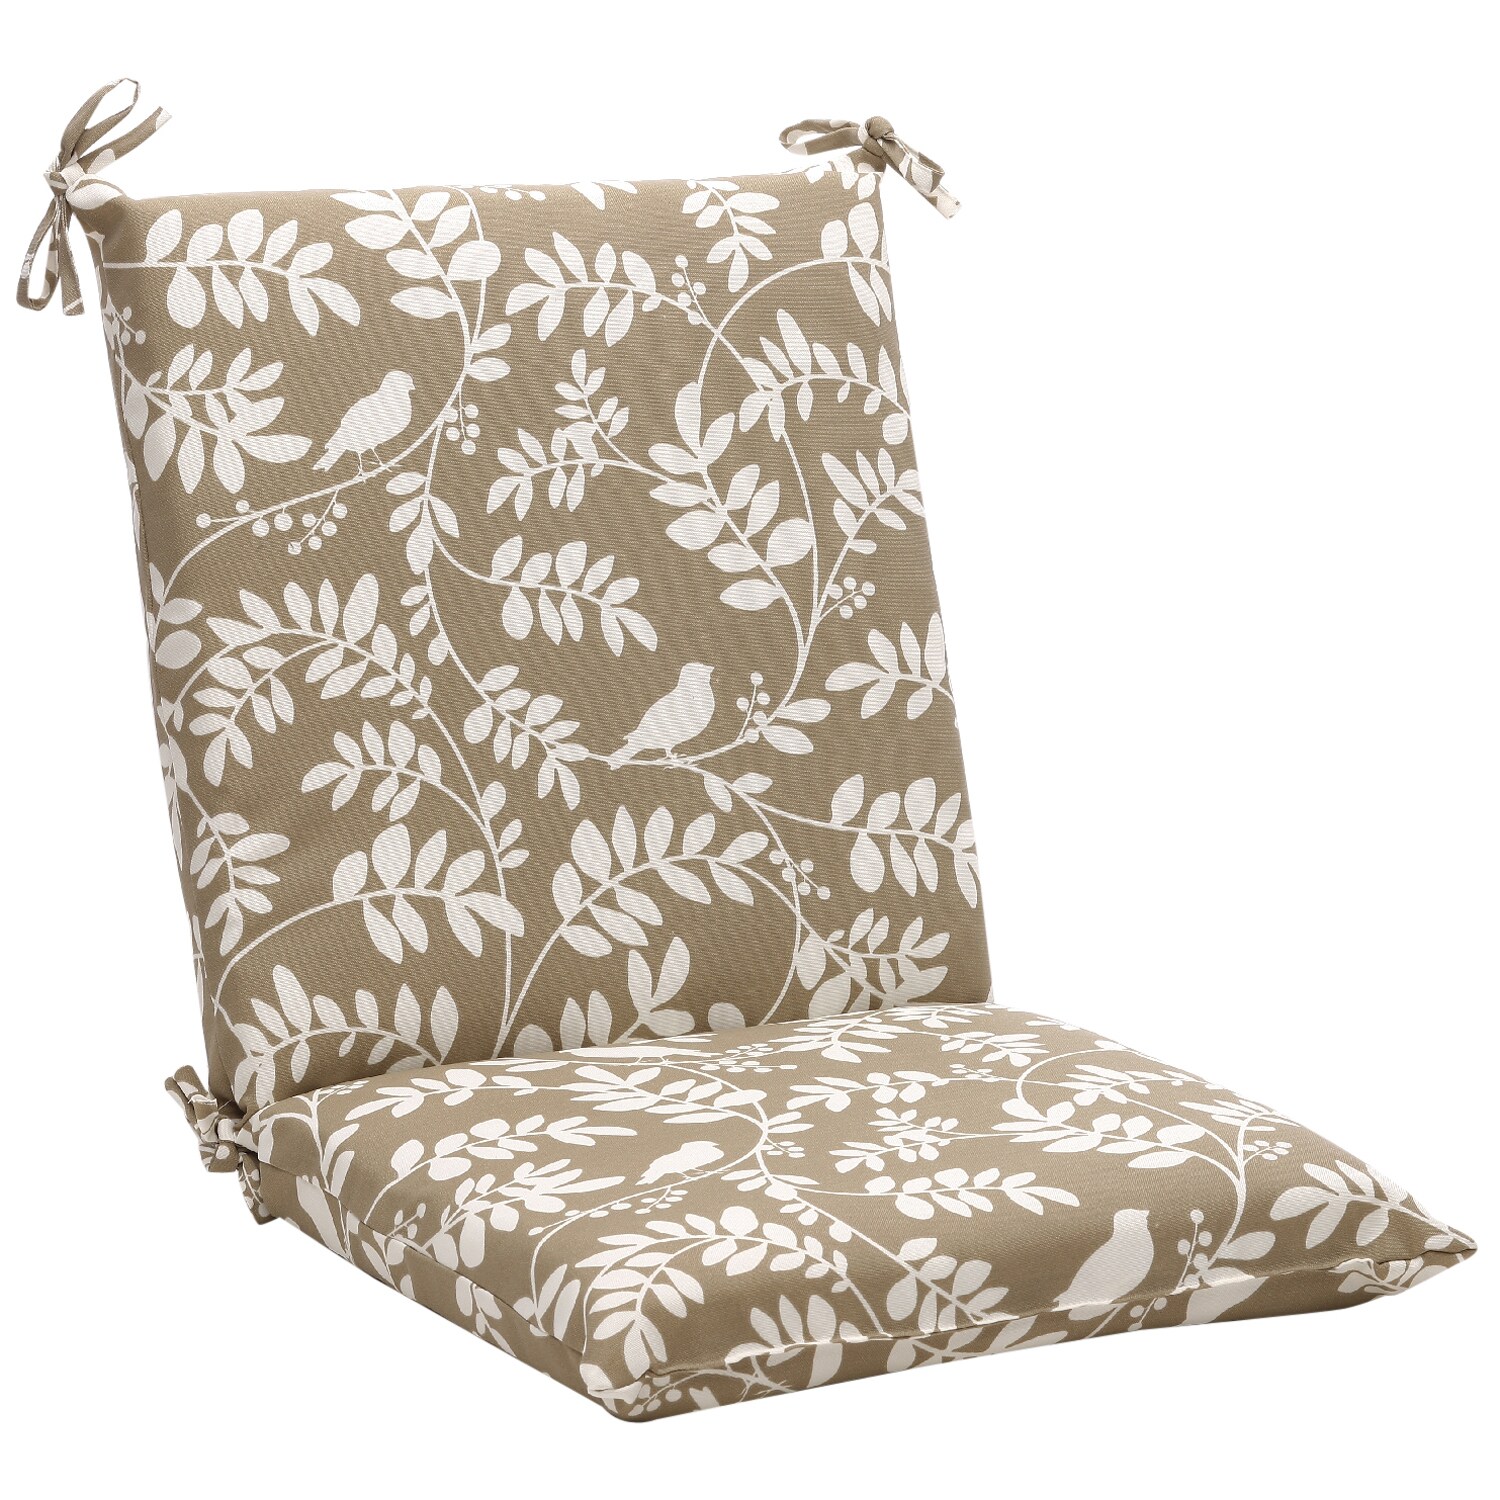 Shop Squared Taupe Floral Outdoor Chair Cushion - Free Shipping Today